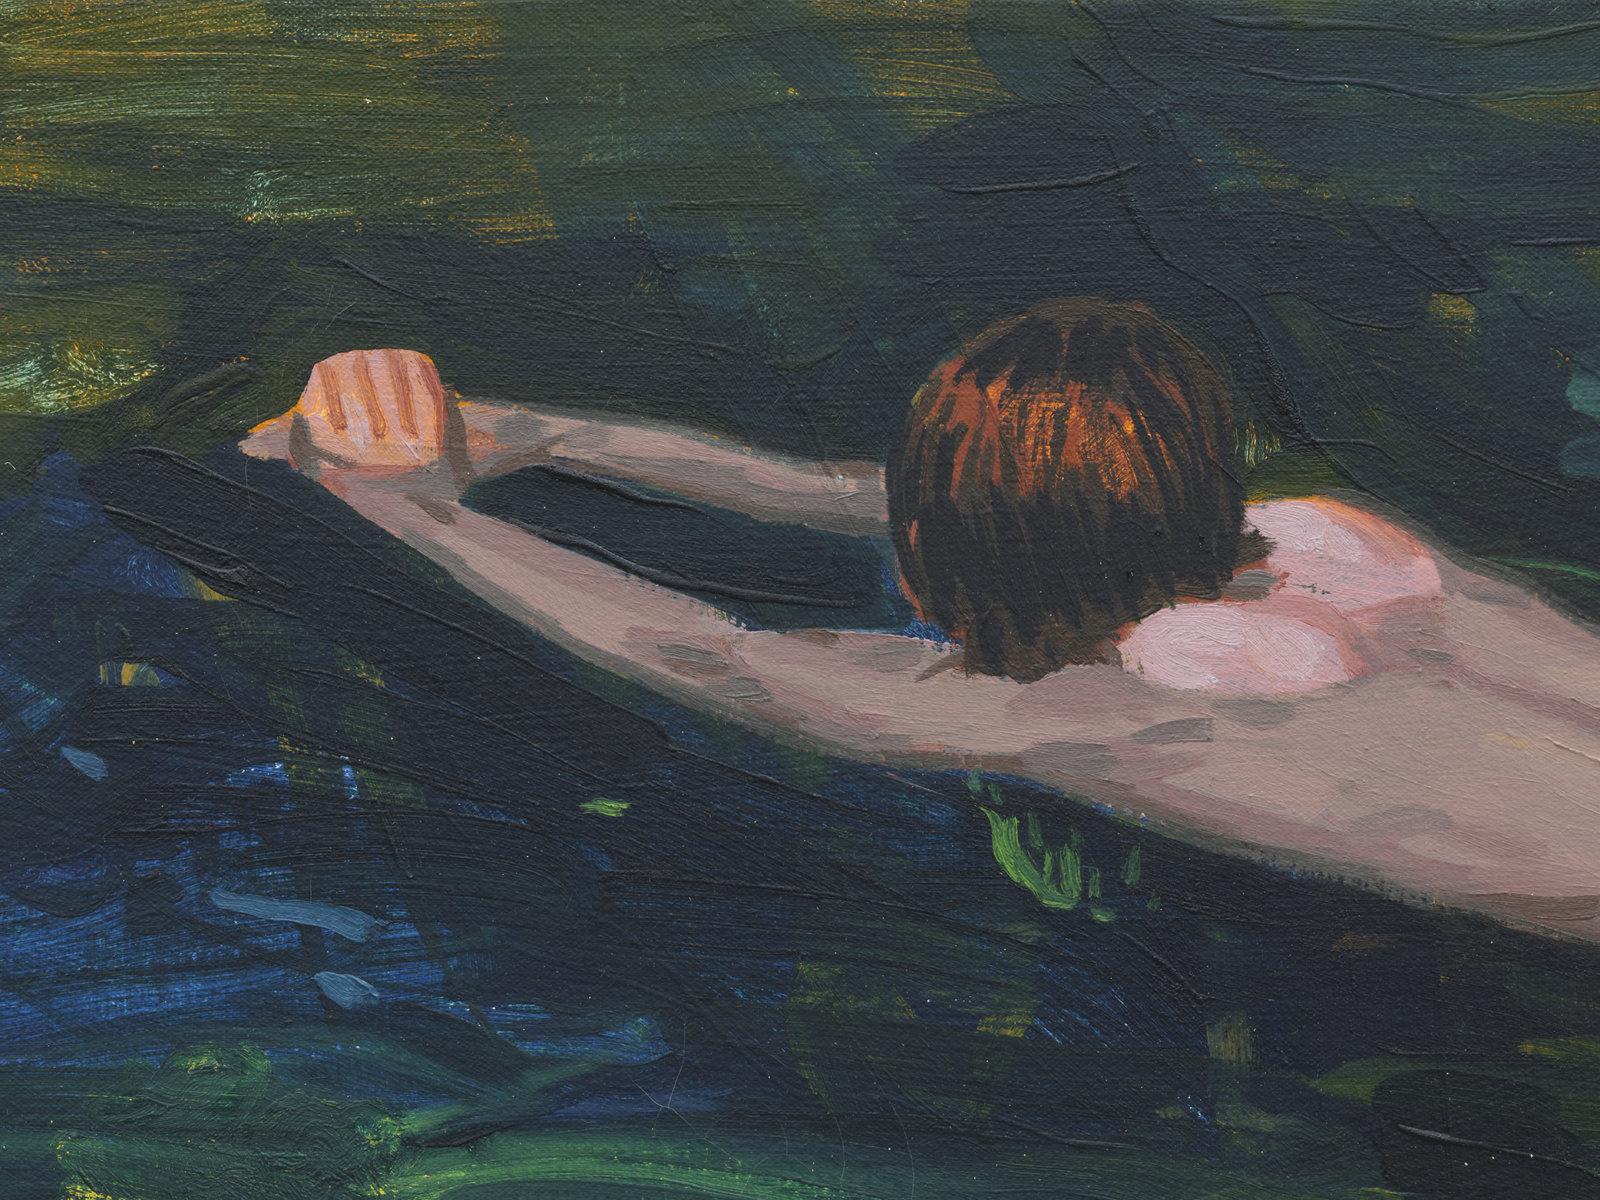 Damian Moppett, Untitled (Green Swimming) (detail), 2020, oil on canvas, 27 x 32 in. (69 x 82 cm)